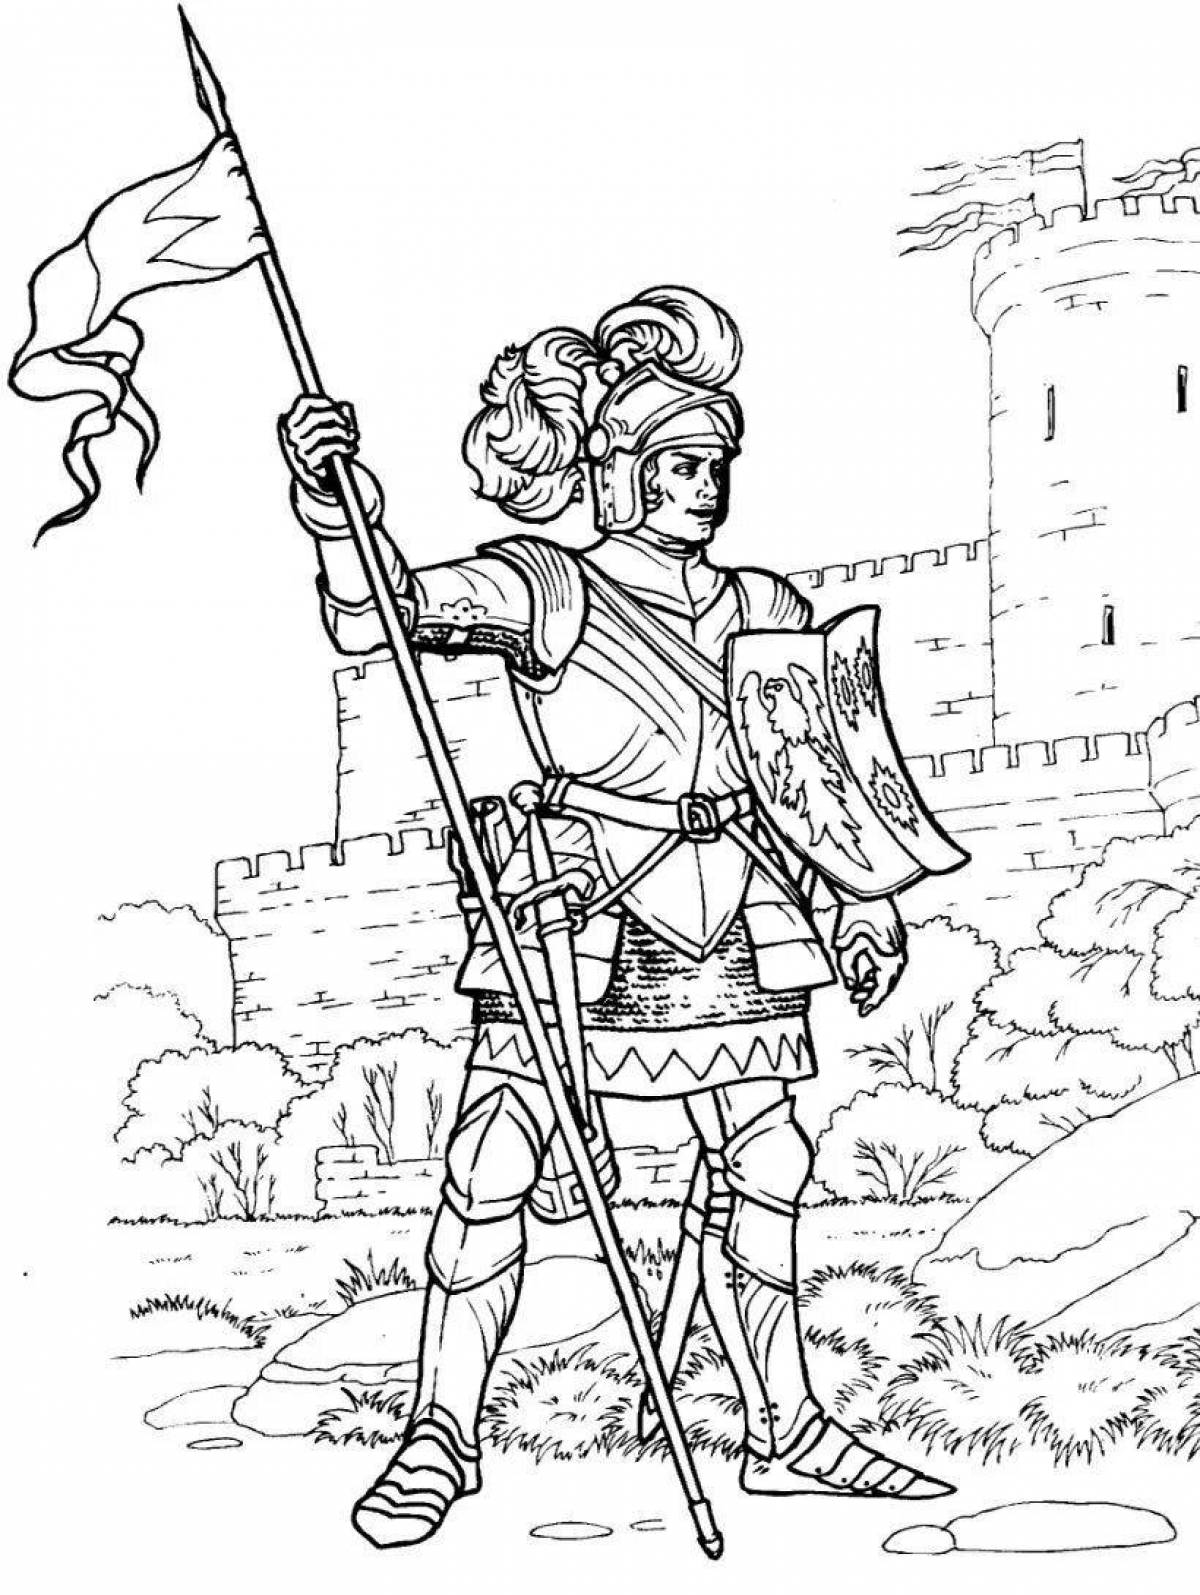 Statue coloring of a knight in armor